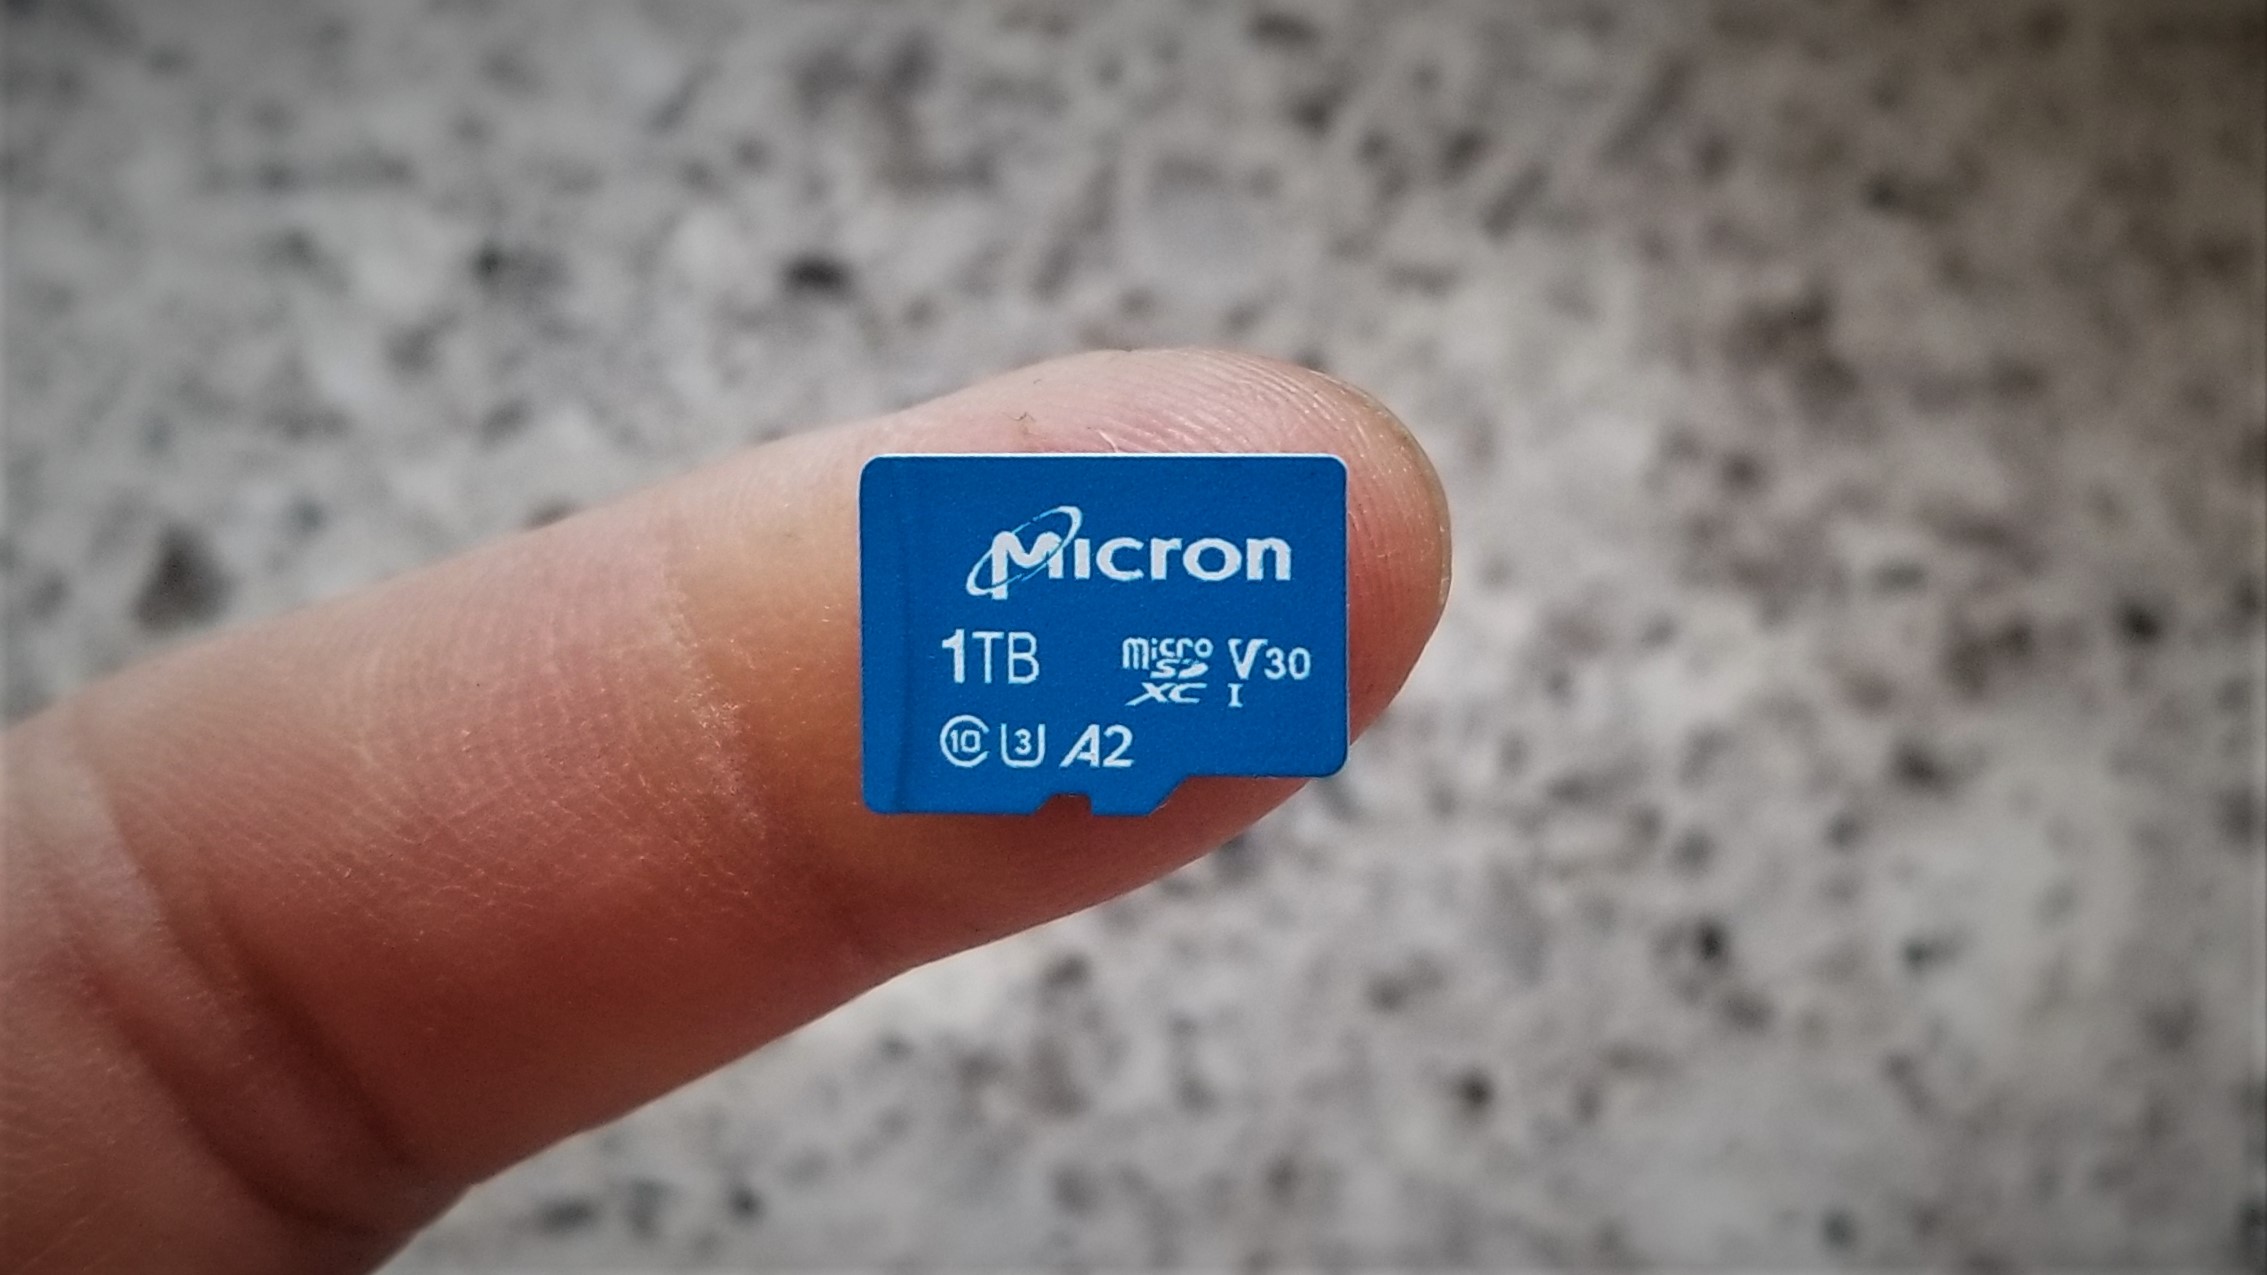 Micron C0 Microsd Card Review 1tb As High Capacity Becomes The Norm In Microsd The Ssd Review